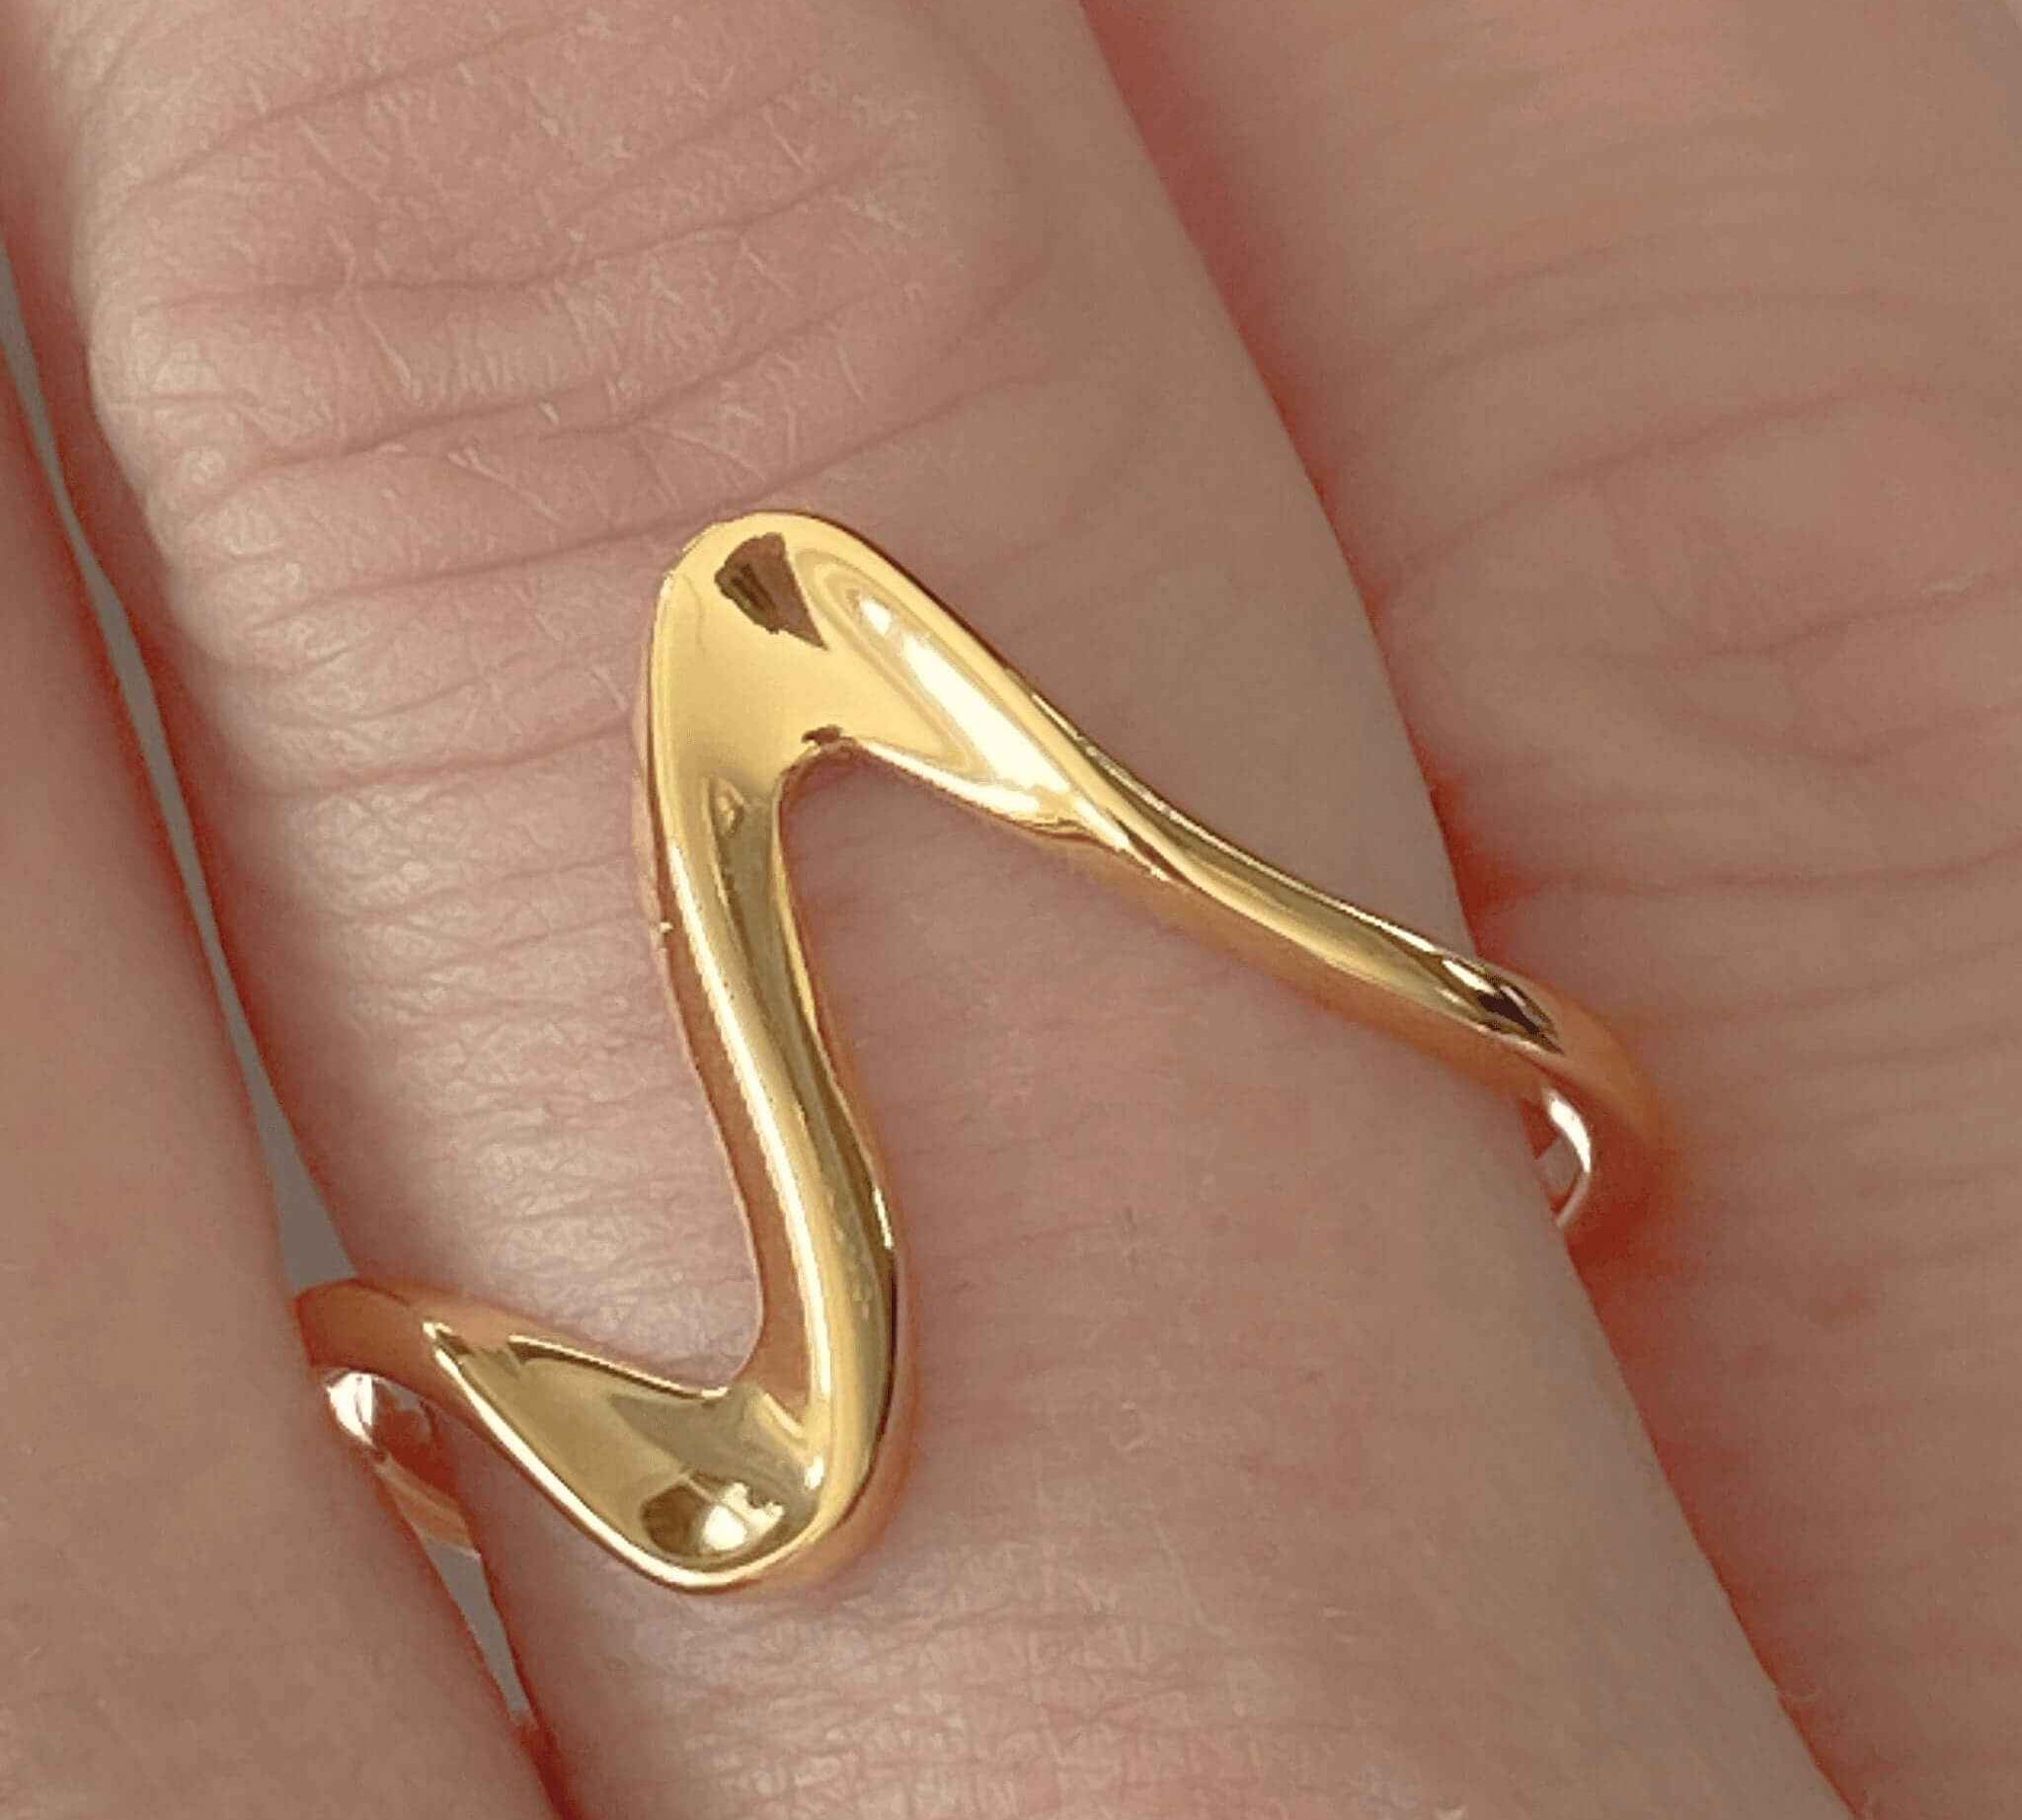 Close-up view of the elegant Zig Zag Ring in Gold, showcasing the intricate sterling silver design by Alessandra James.